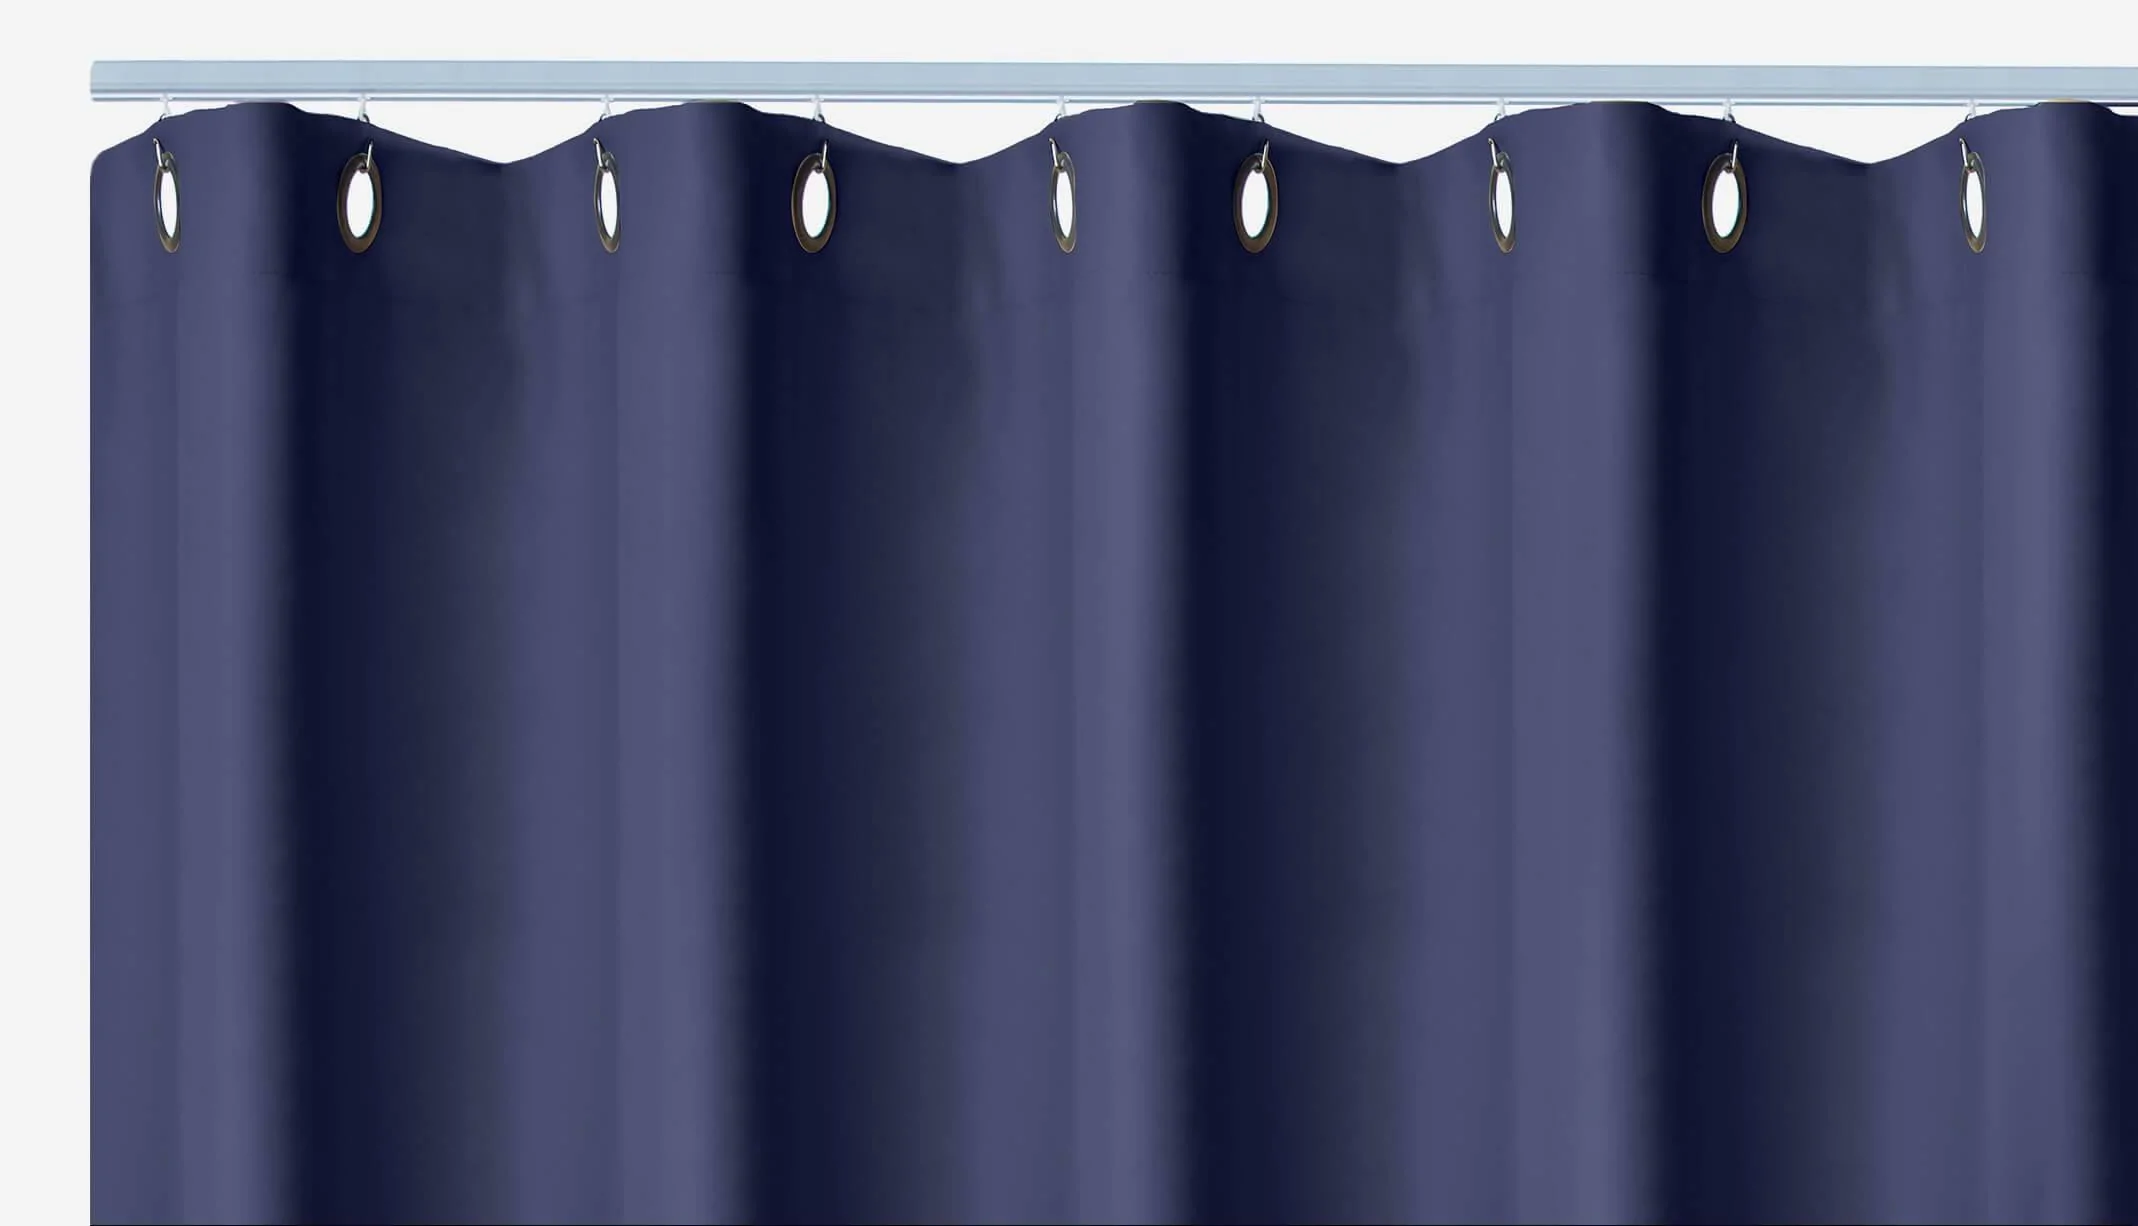 Curved Ceiling Curtain Track: Easy Install & Perfect for Corners –  RoomDividersNow